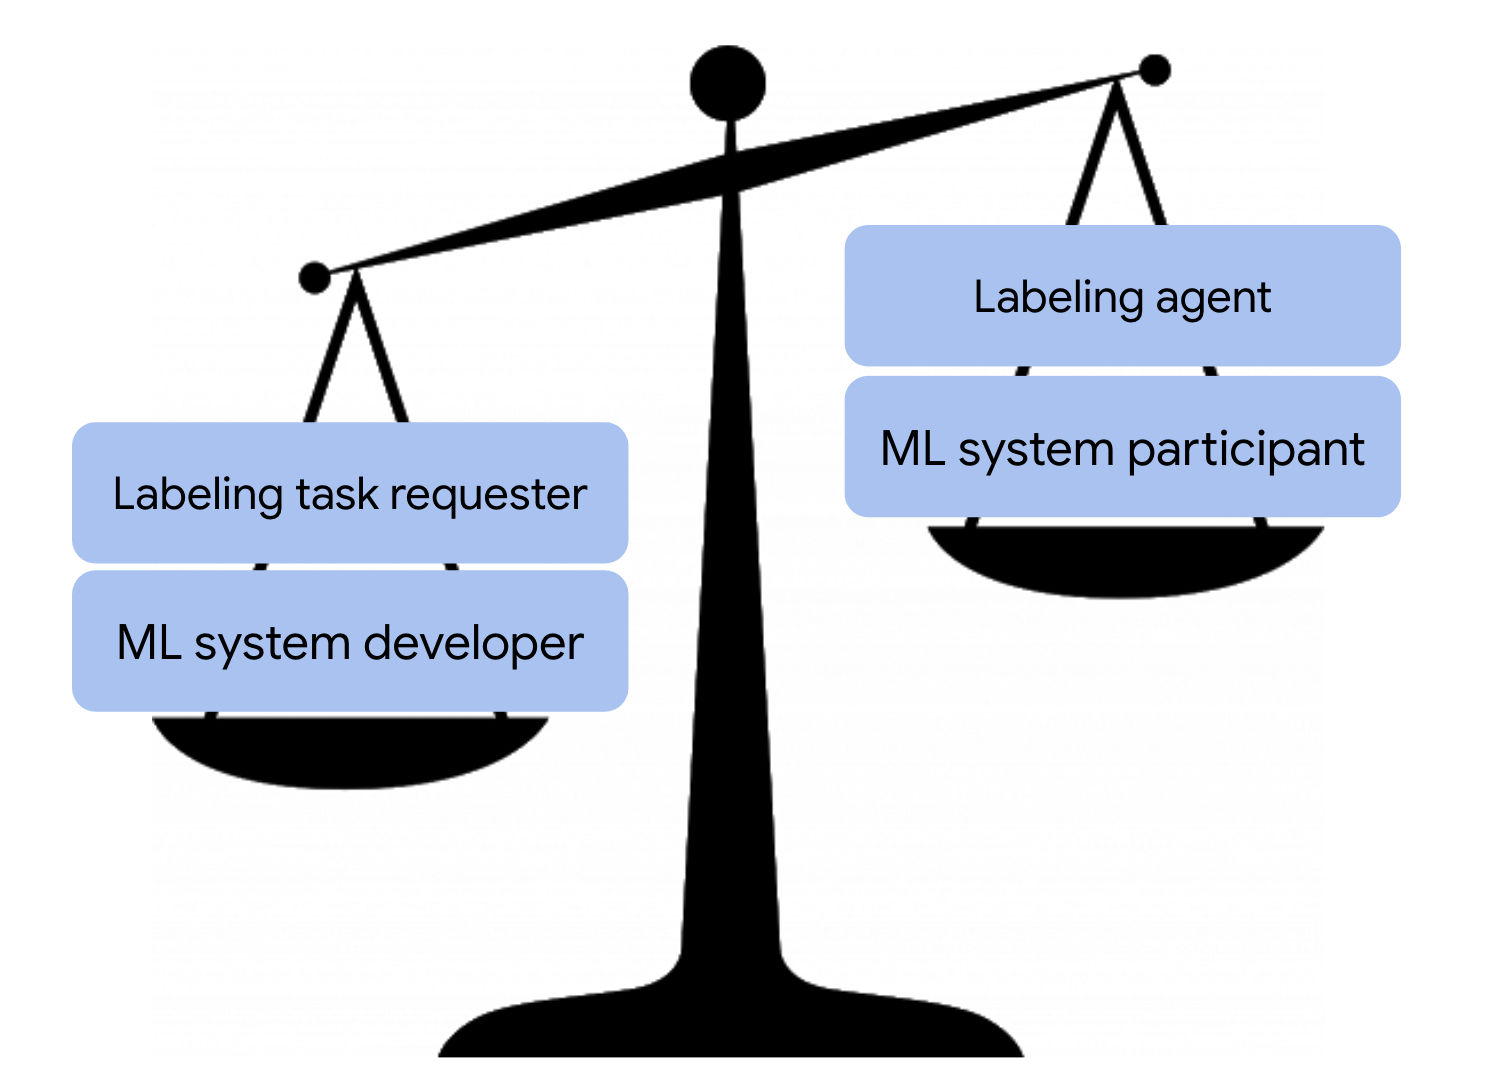 Image caption: There are huge power imbalances in machine learning system development: ML system developers have more power than ML system participants, and labeling task requesters have more power than labeling agents. [Image source: http://www.clker.com/clipart-scales-uneven.html] Image description: Imbalanced scale image — ML system developer & labeling task requester weigh more than ML system participant & labeling agent